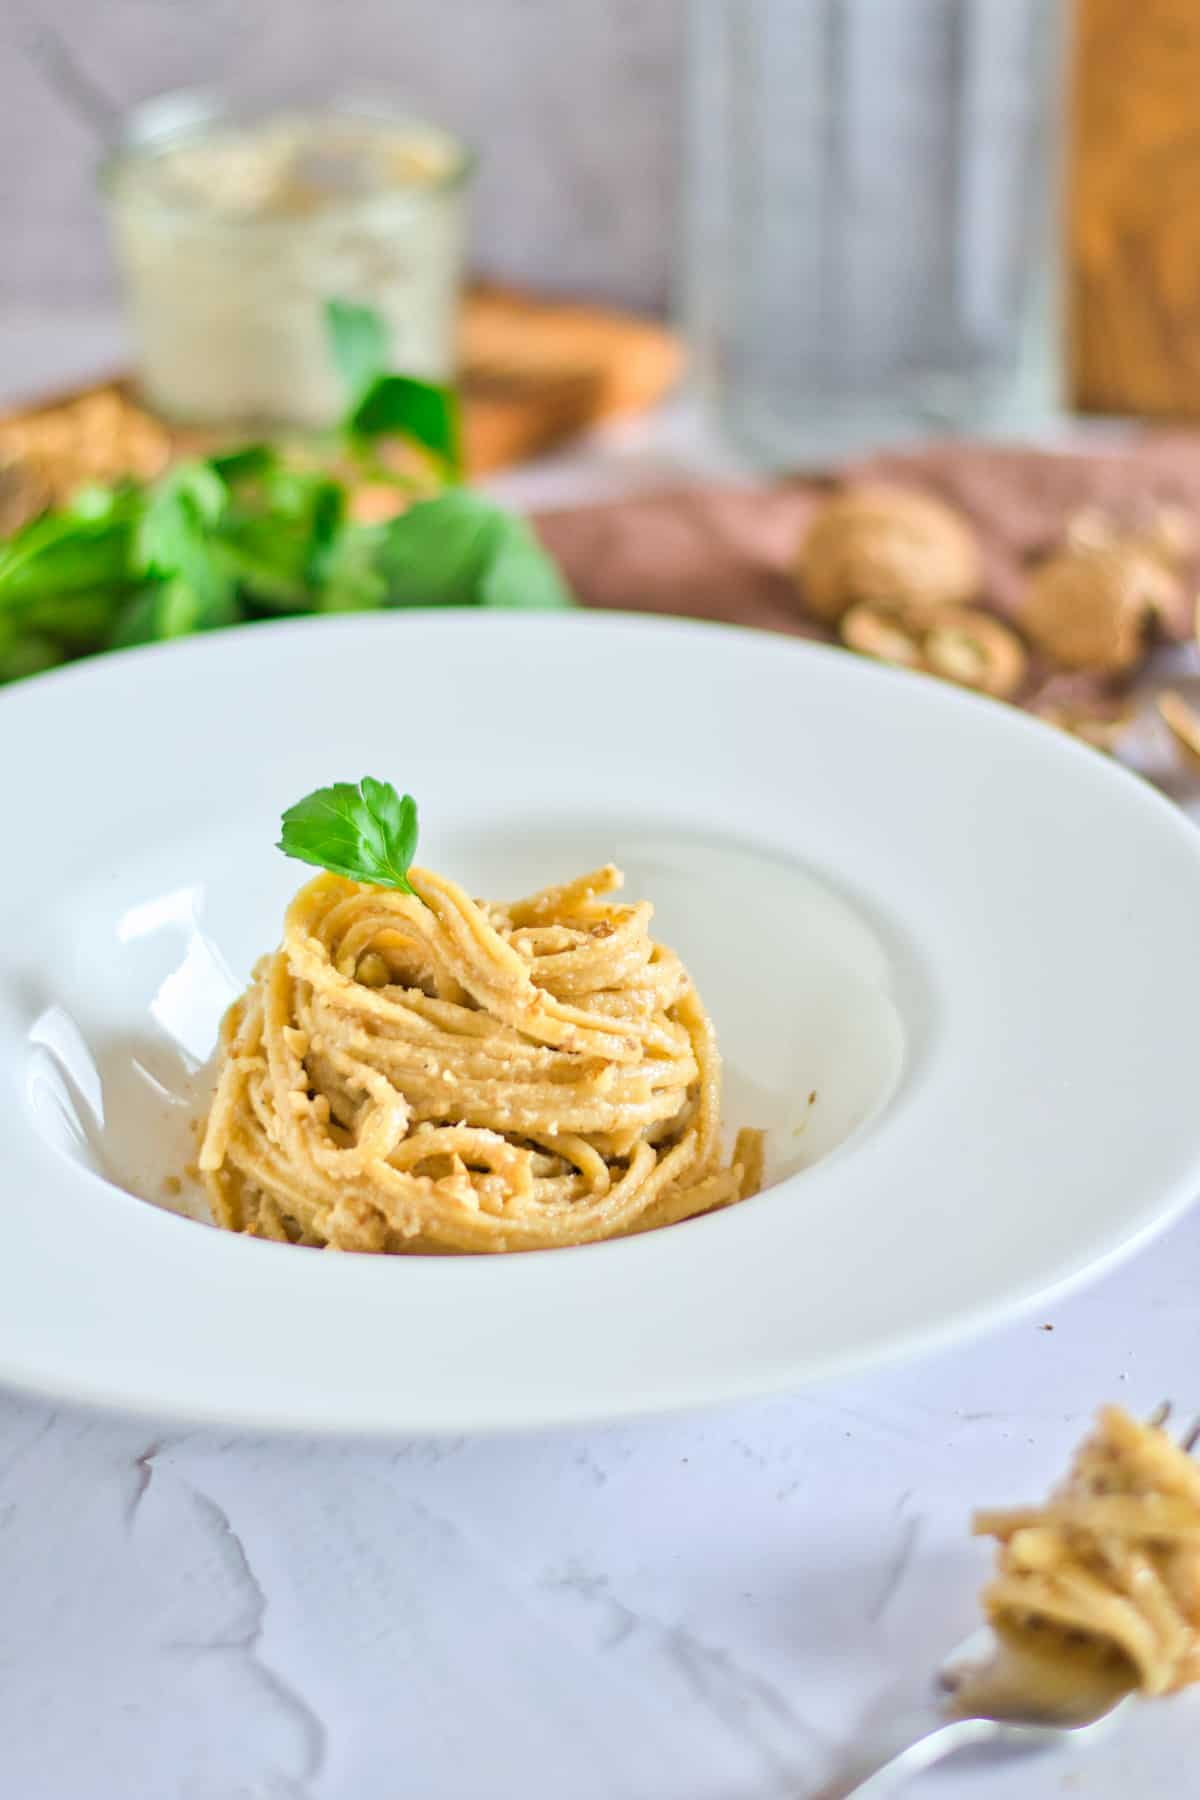 Walnut sauce with pasta topped with sprig of parsley in a white dish.